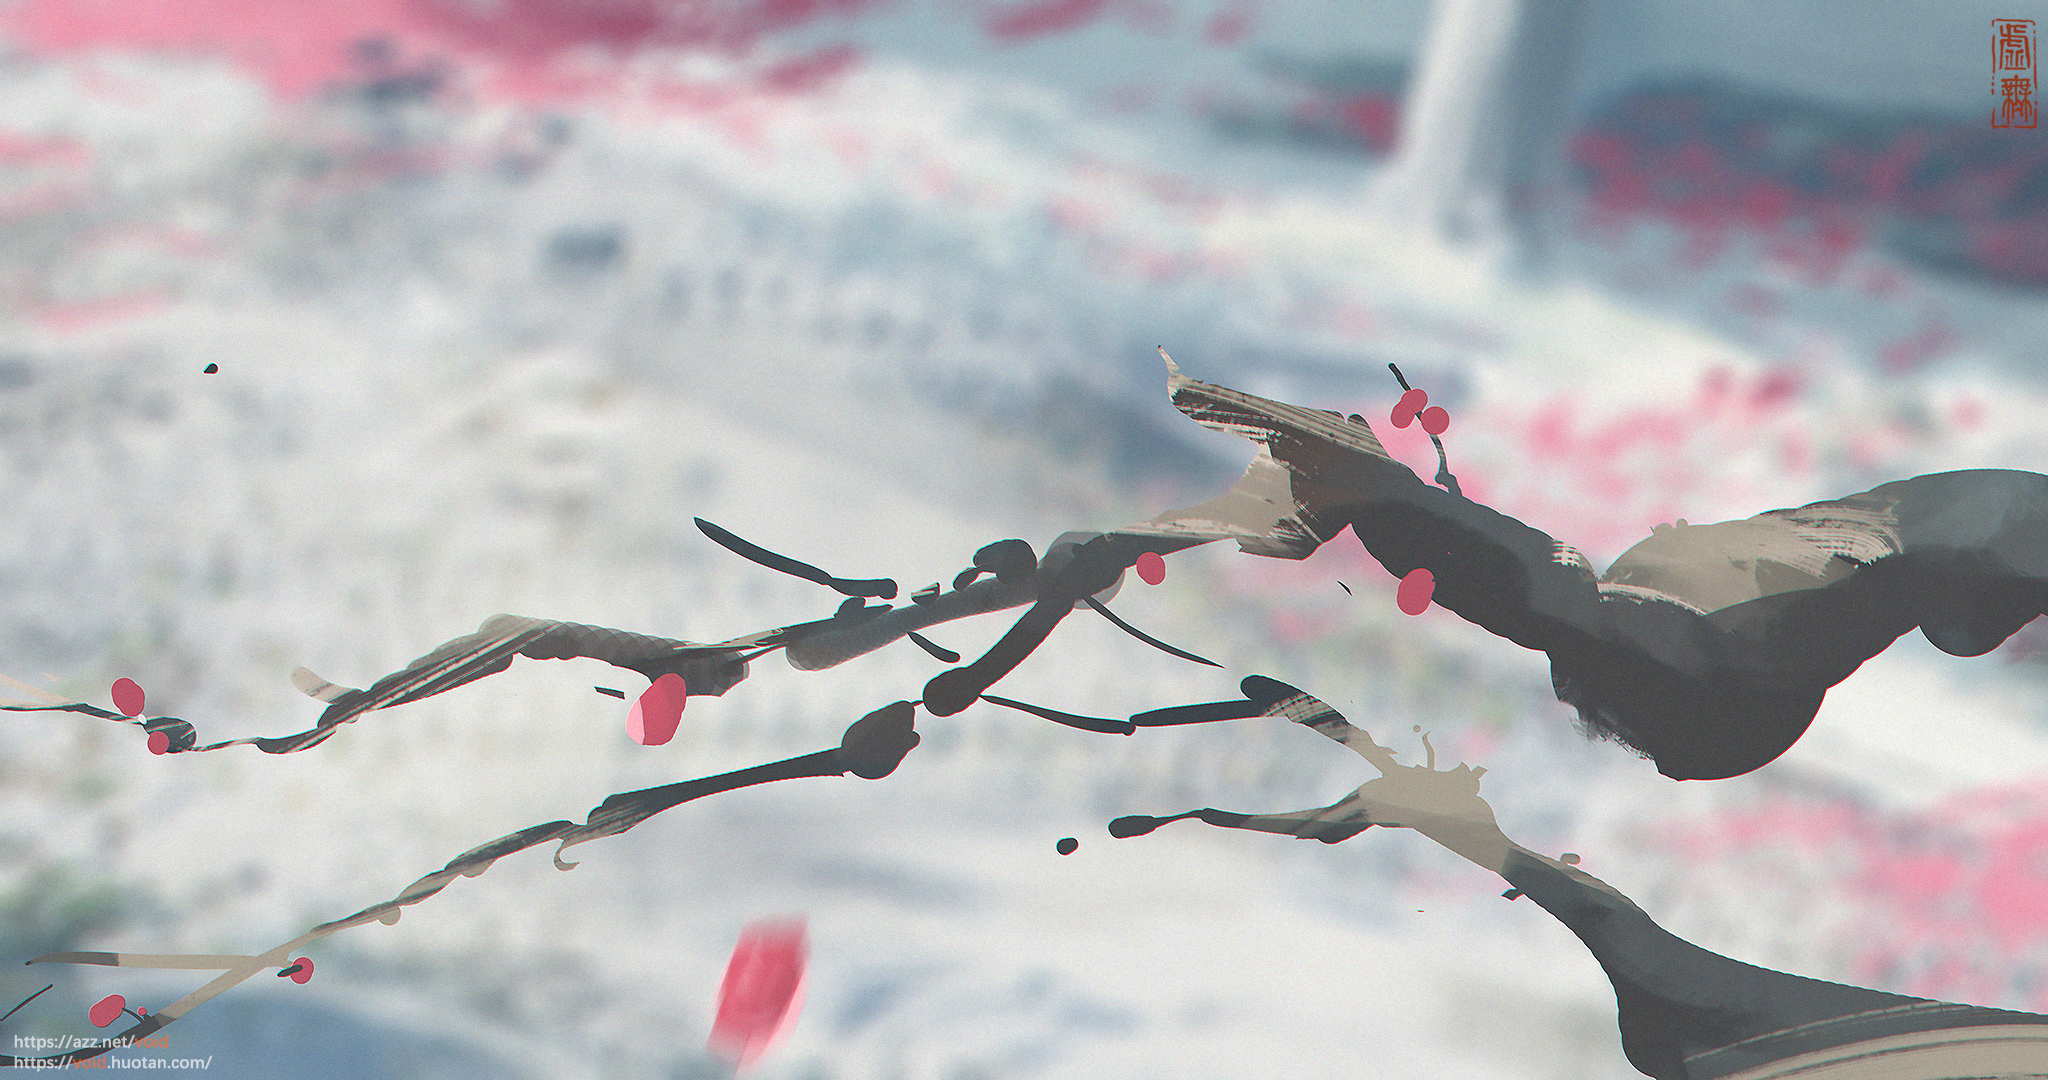 General 2048x1080 digital art cherry trees petals red petals branch blurry background watermarked bright void_0 nature snow